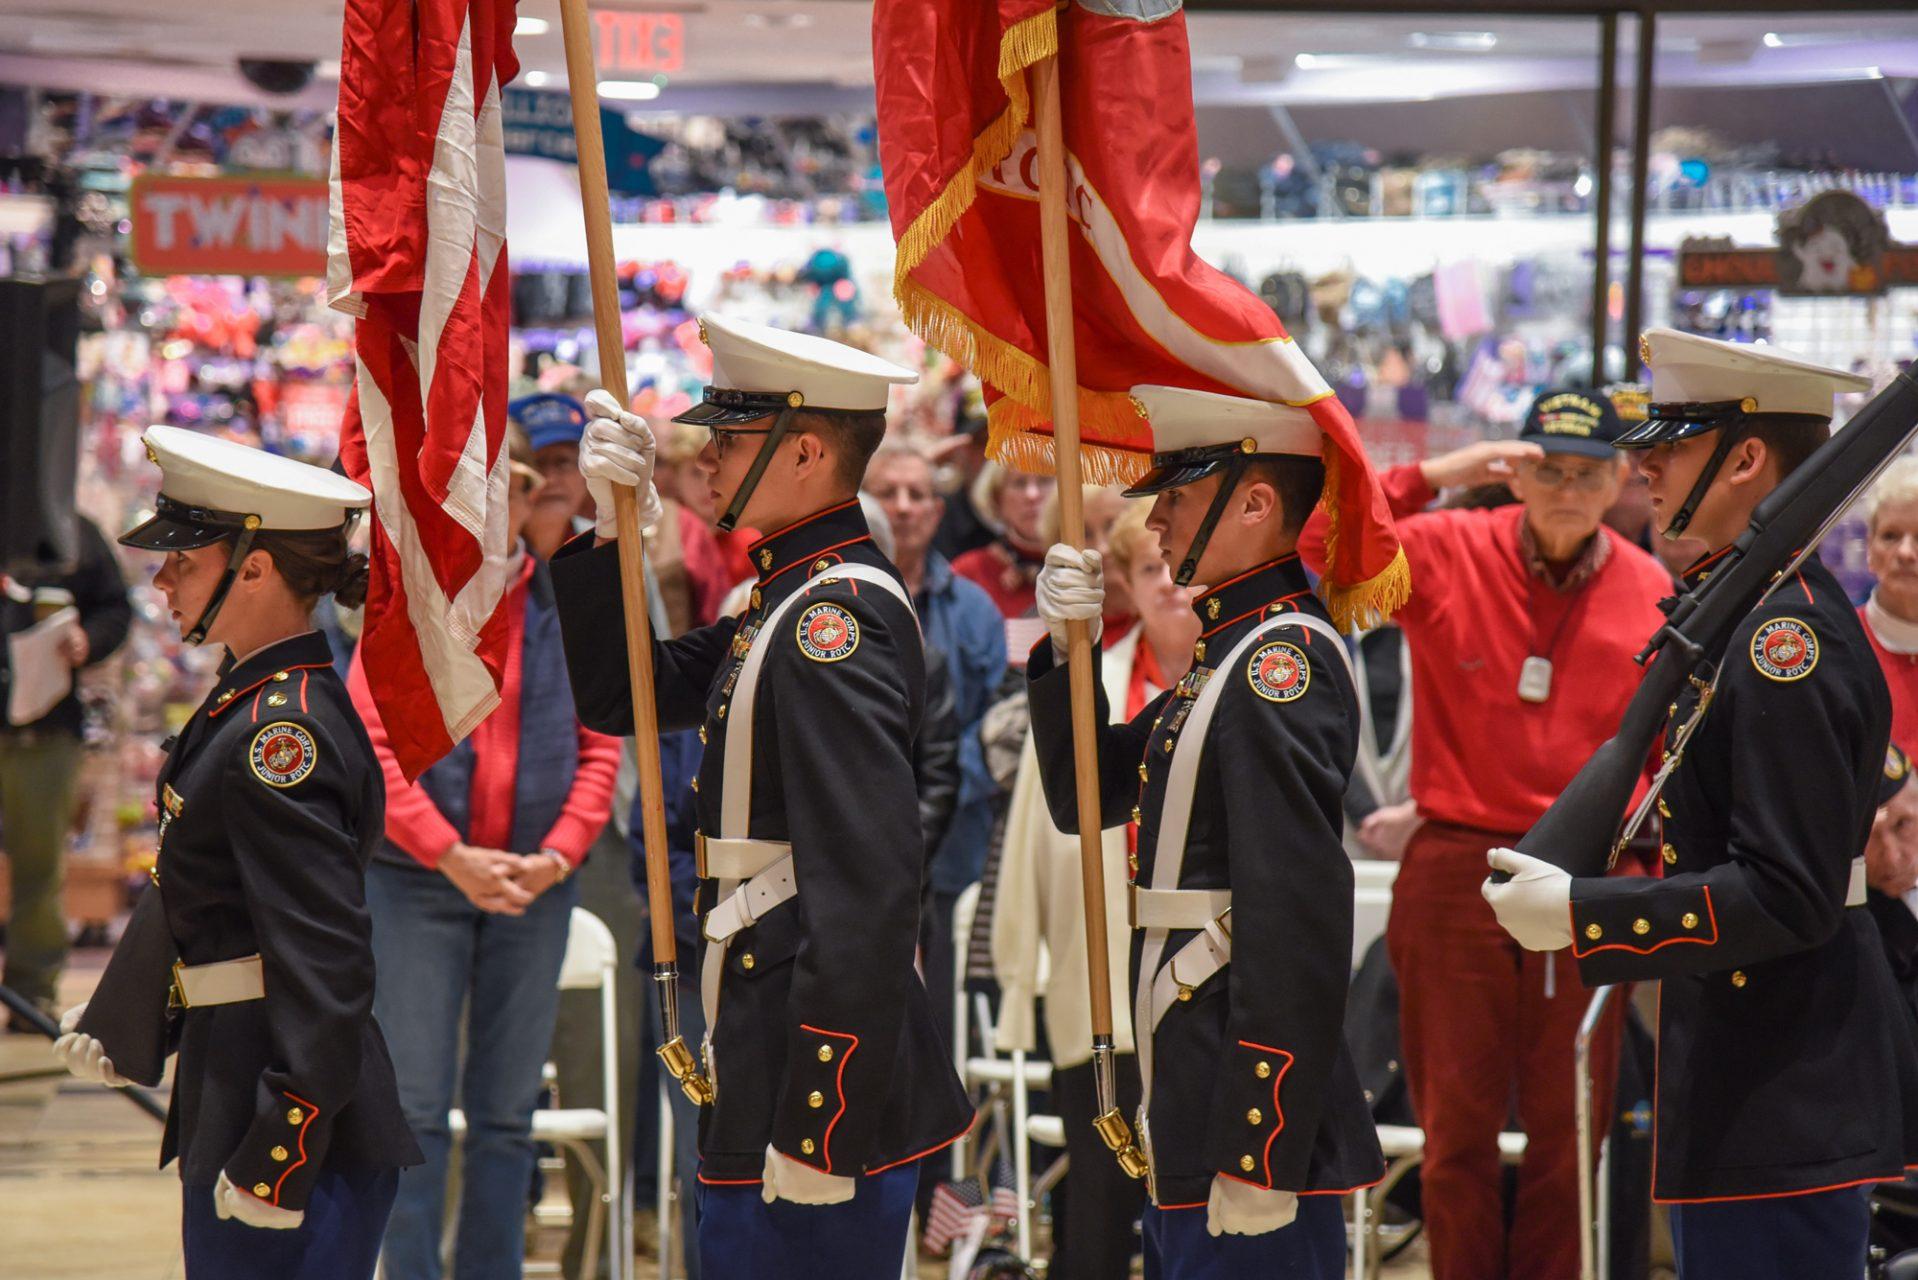 The+Watauga+High+School+MCJROTC+performing+the+Retiring+of+Colors+during+The+High+Countrys+Premiere+Veterans+Day+Event.+Many+veterans+and+families+of+veterans+gathered+in+the+Boone+Mall+this+past+Saturday+to+honor+those+who+have+served+our+country.